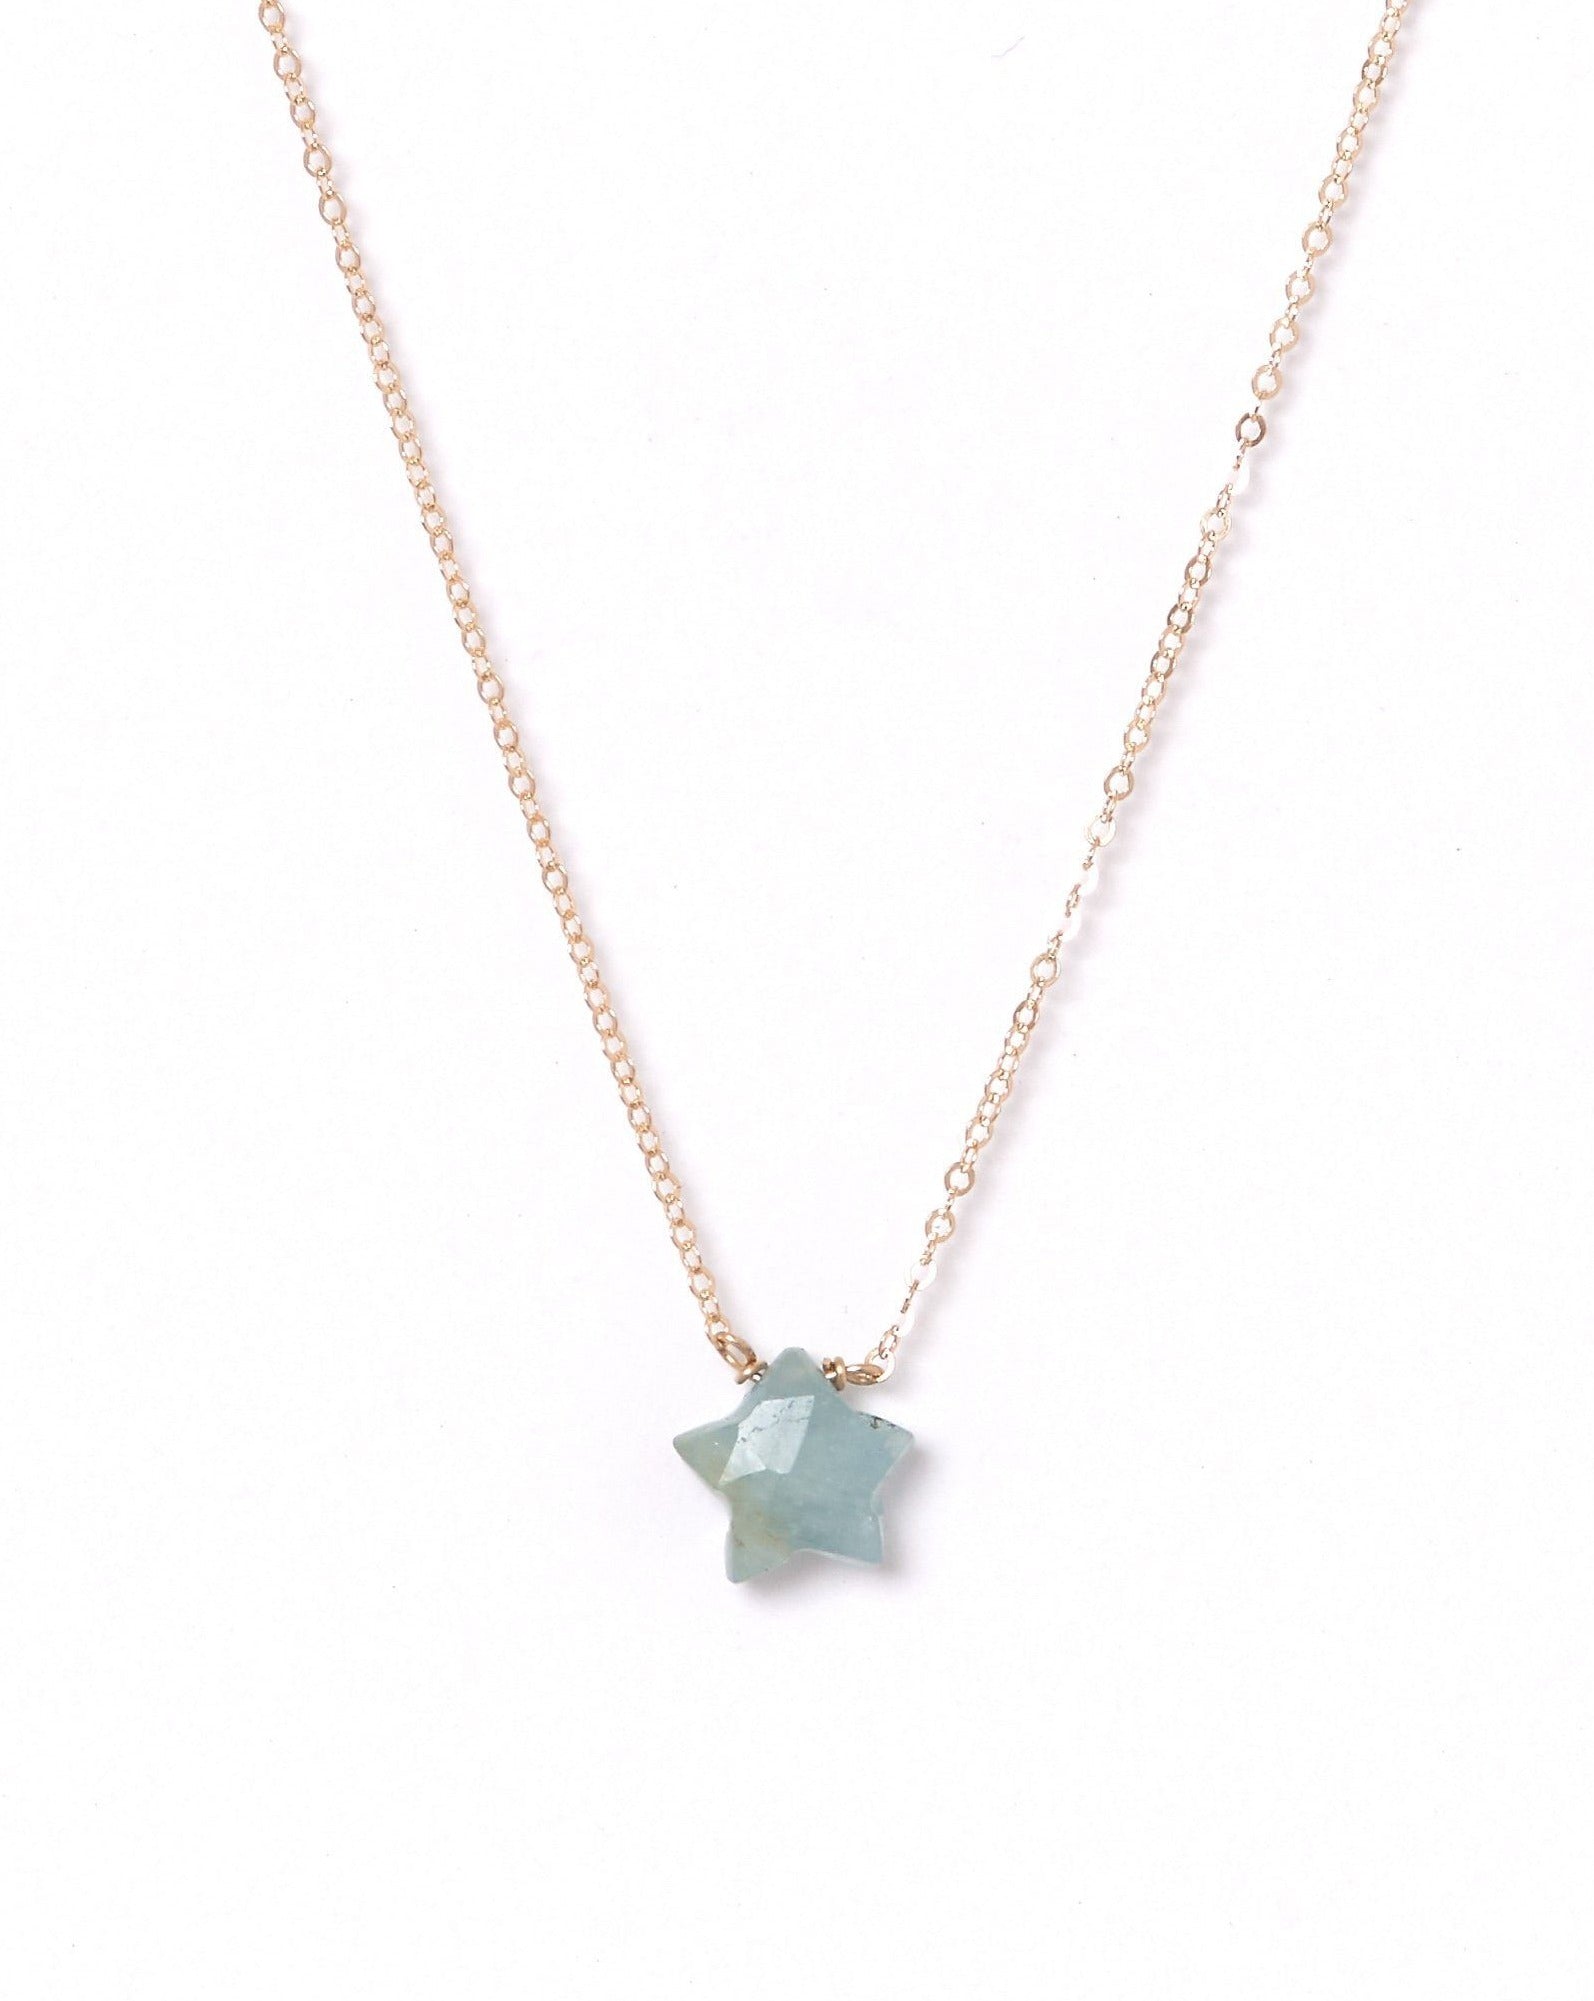 Star Necklace by KOZAKH. A 16 to 18 inch adjustable length necklace, crafted in 14K Gold Filled, featuring an Amazonite star charm.